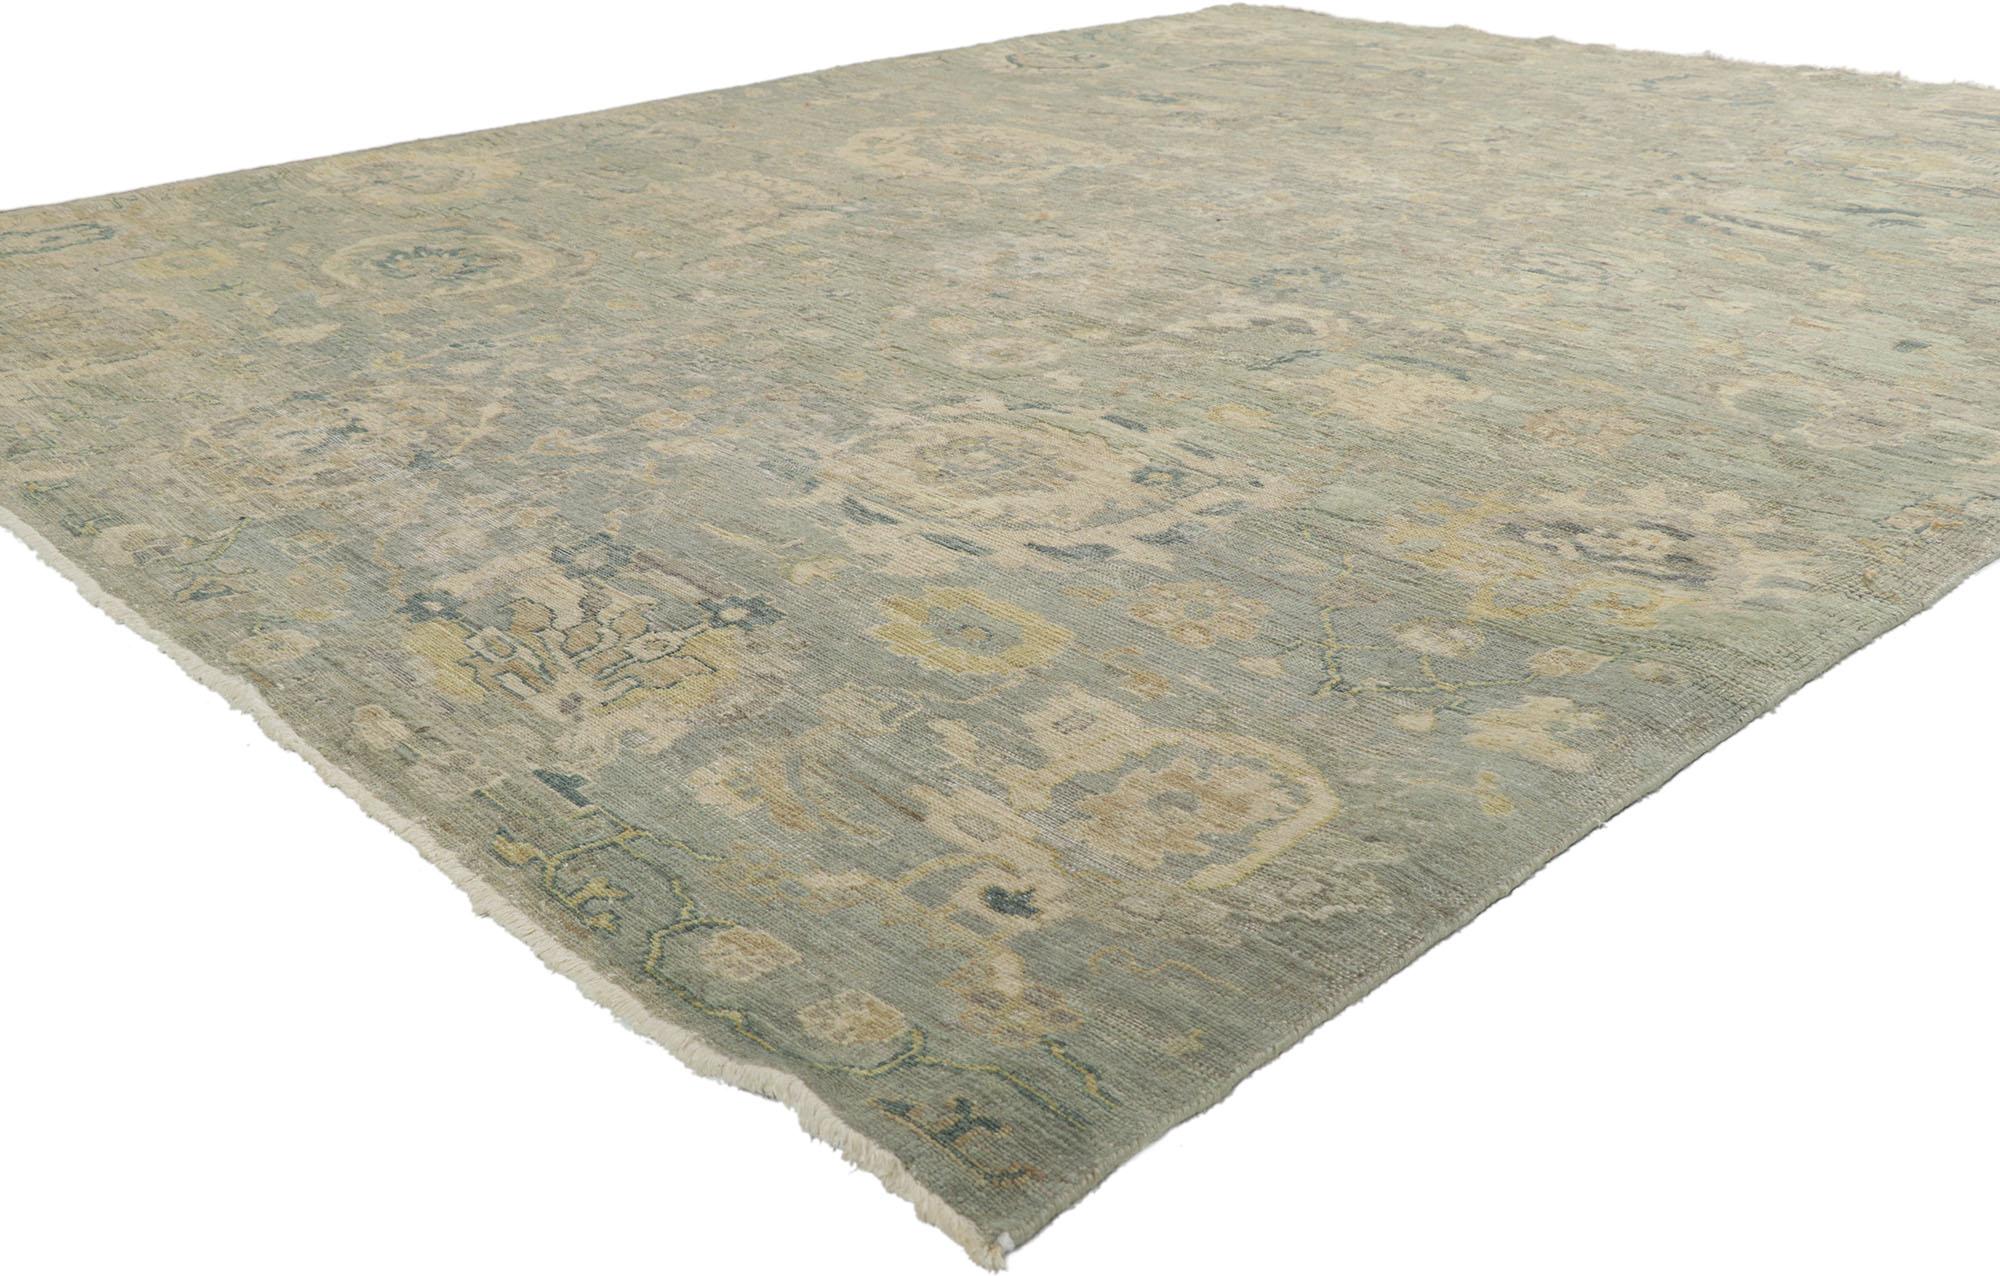 30725 New Contemporary Distressed rug, 07'10 x 09'07. With its neutral colors and weathered beauty combined with nostalgic charm, this new contemporary distressed rug creates an inimitable warmth and calming ambiance. The geometric pattern and